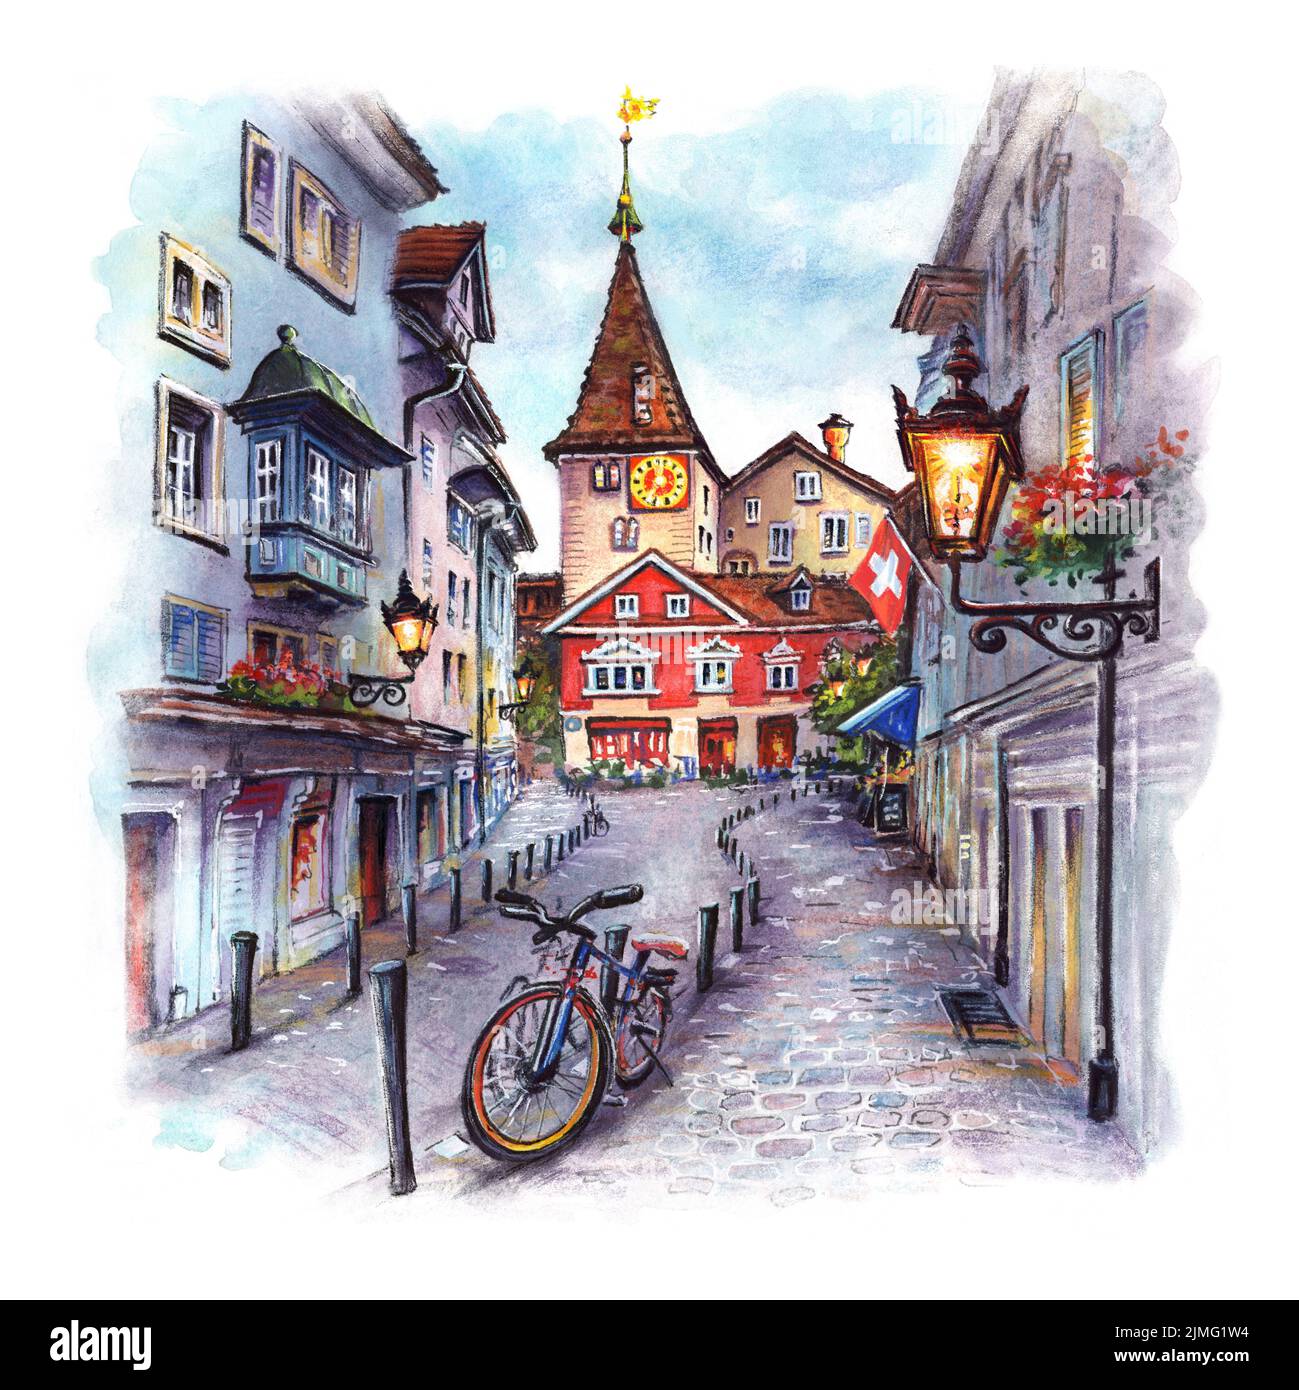 Watercolor sketch of Cozy street in the Old Town of Zurich, the largest city in Switzerland. Stock Photo